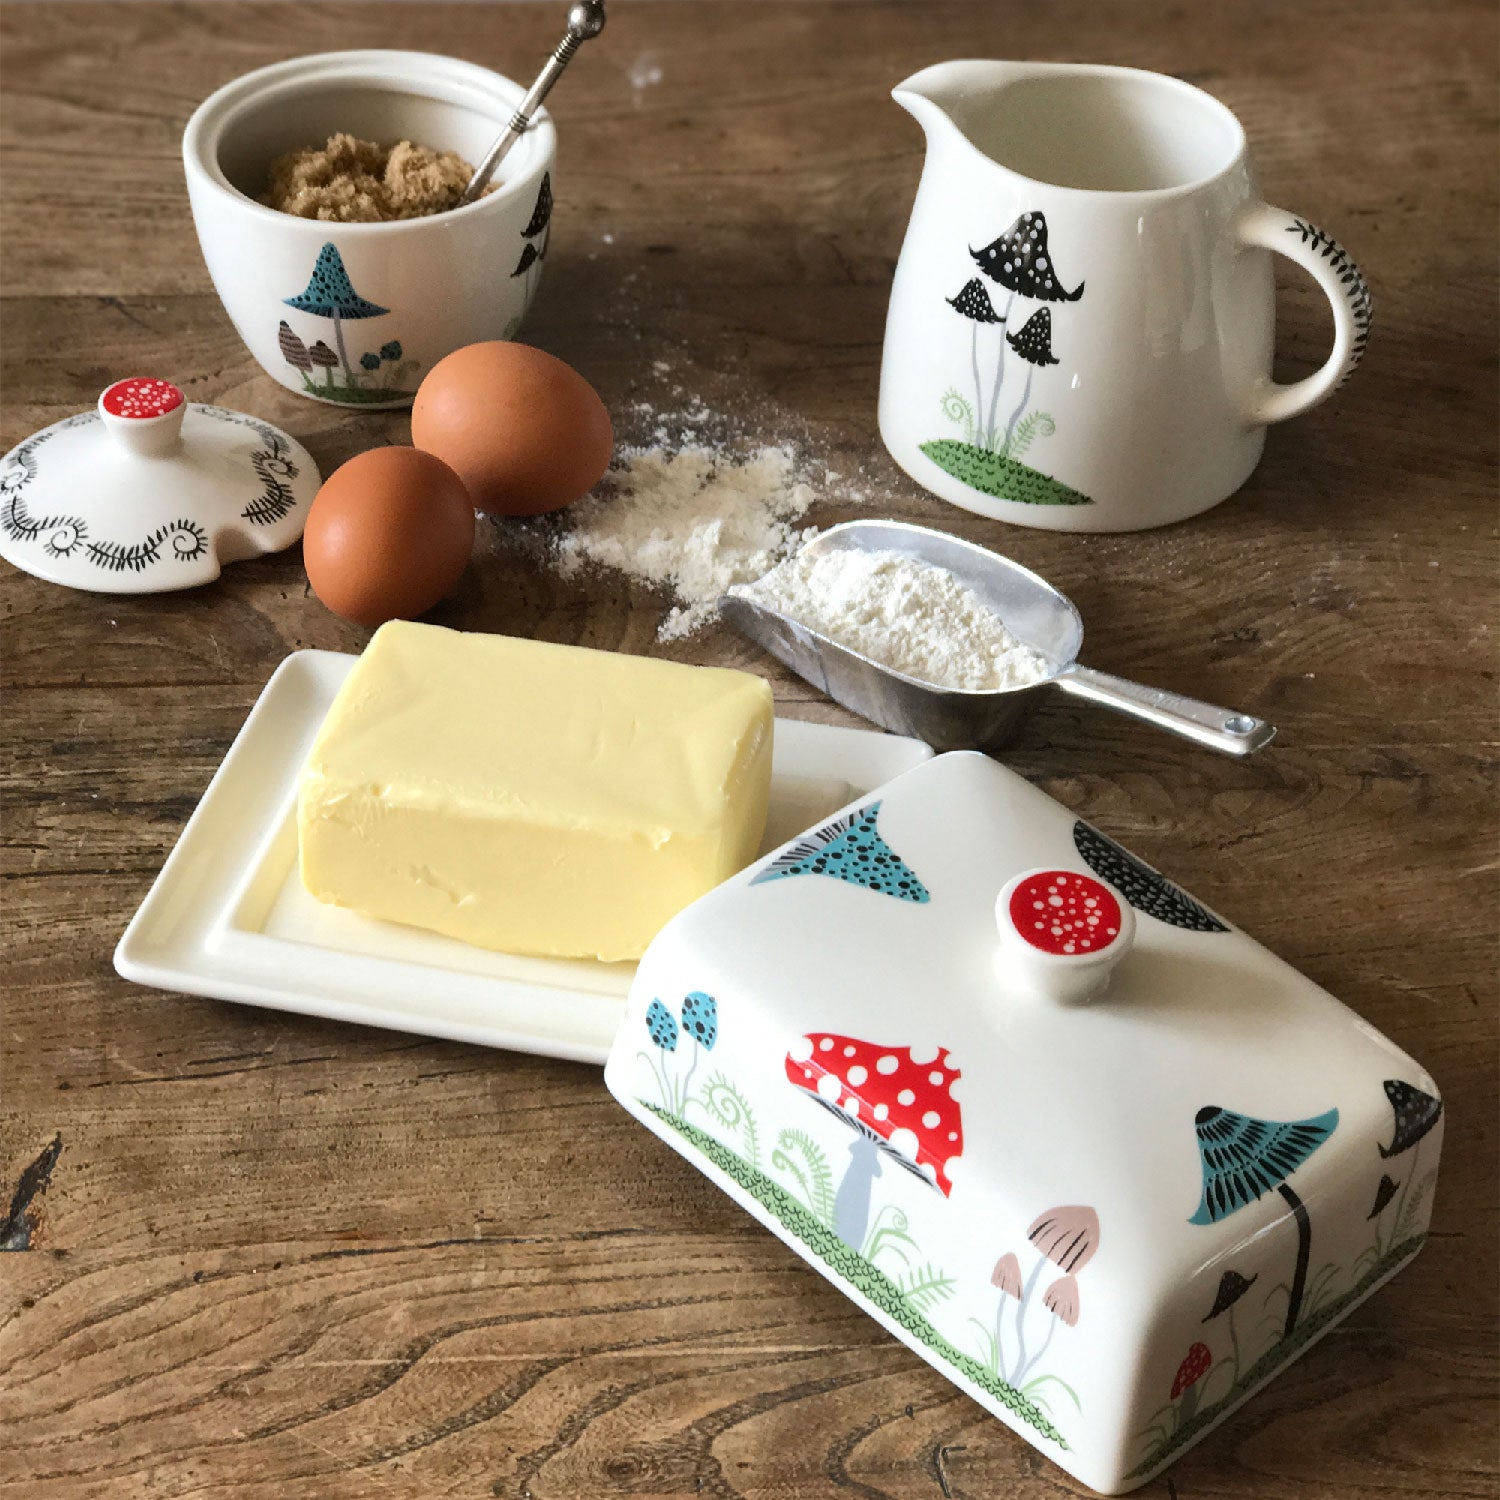 Handmade Ceramic Moth Butter Dish, designed in the UK by Hannah Turner.  Perfect stylish Butter container, Gift Boxed Pottery Butter Dish